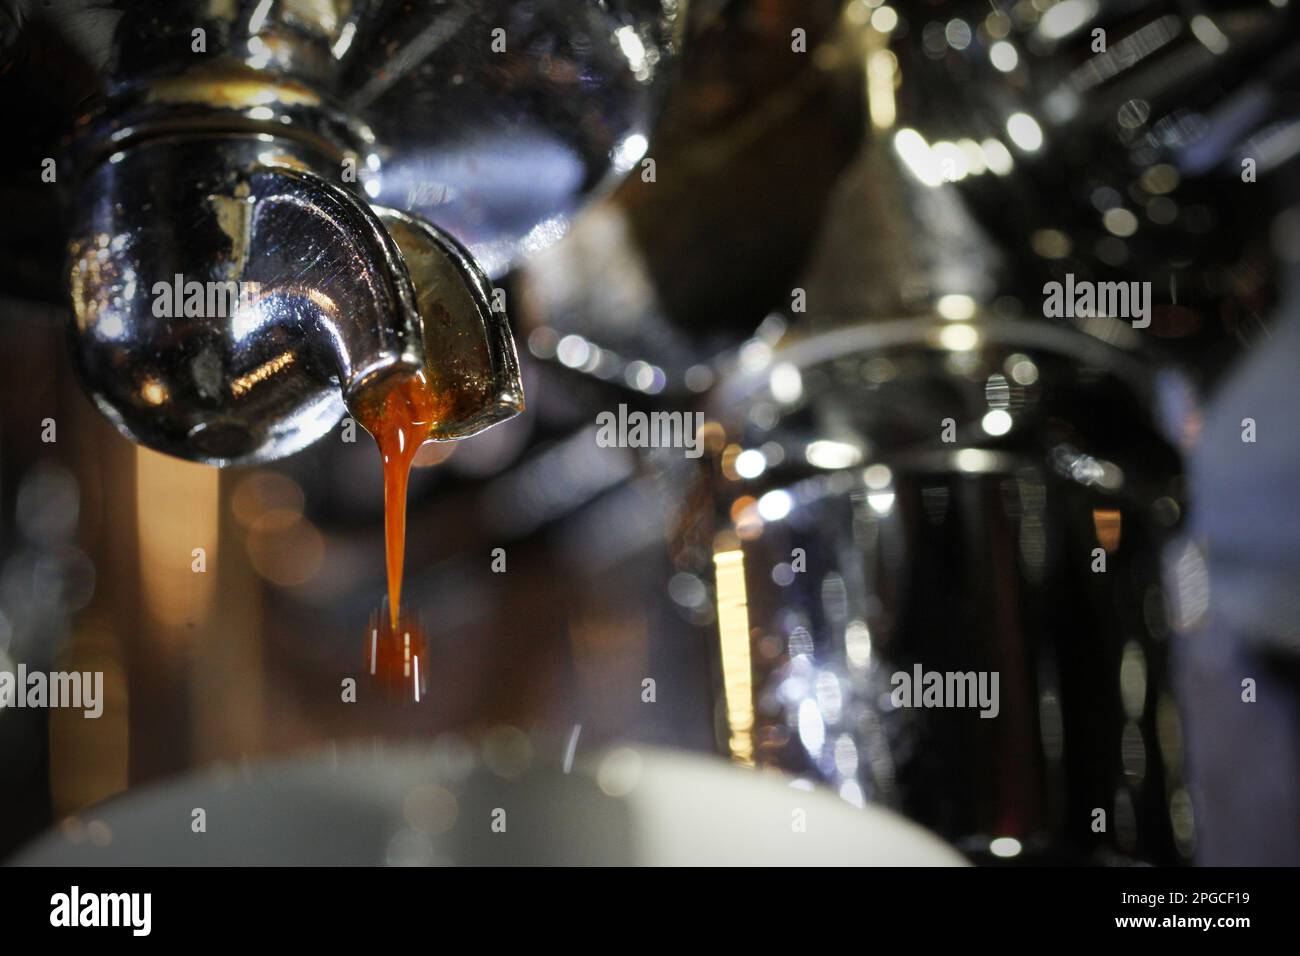 Extreme close up of the start of the perfect espresso pour with the brown coffee shot dripping off the stainless steel single portafilter handle. Bari Stock Photo